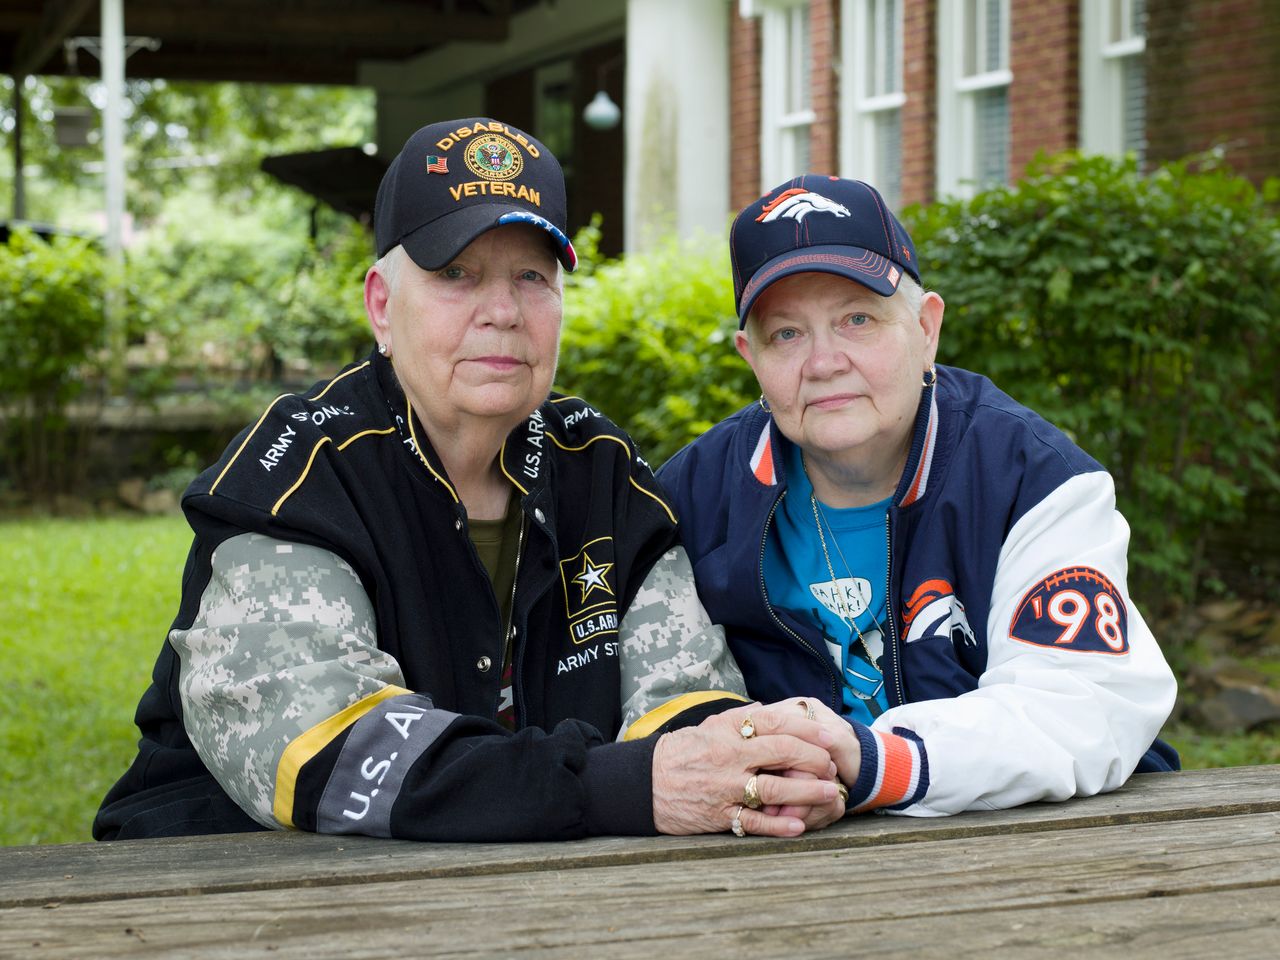 Hank, 76, and Samm, 67, North Little Rock, Ark."It was a lot like in the olden days, you know, there were a lot of people around like me, and people just expected us to become unmarried aunts or fancy boys, and nobody ever confronted you with it. My father would say things like, 'Oh, this one will never get married.' If I heard him say that today, I would say, 'Oh, he’s telling them I am gay.' Only I didn’t have those words for it back then. — Hank "Hank and I have been together 44 years. I found this one in Western Michigan. She was different from anybody I have ever met in my whole life, and I knew that she would be in my life for the rest of my life. There was this immediate connection that would always be there. The way we are today, we started out that way." — Samm